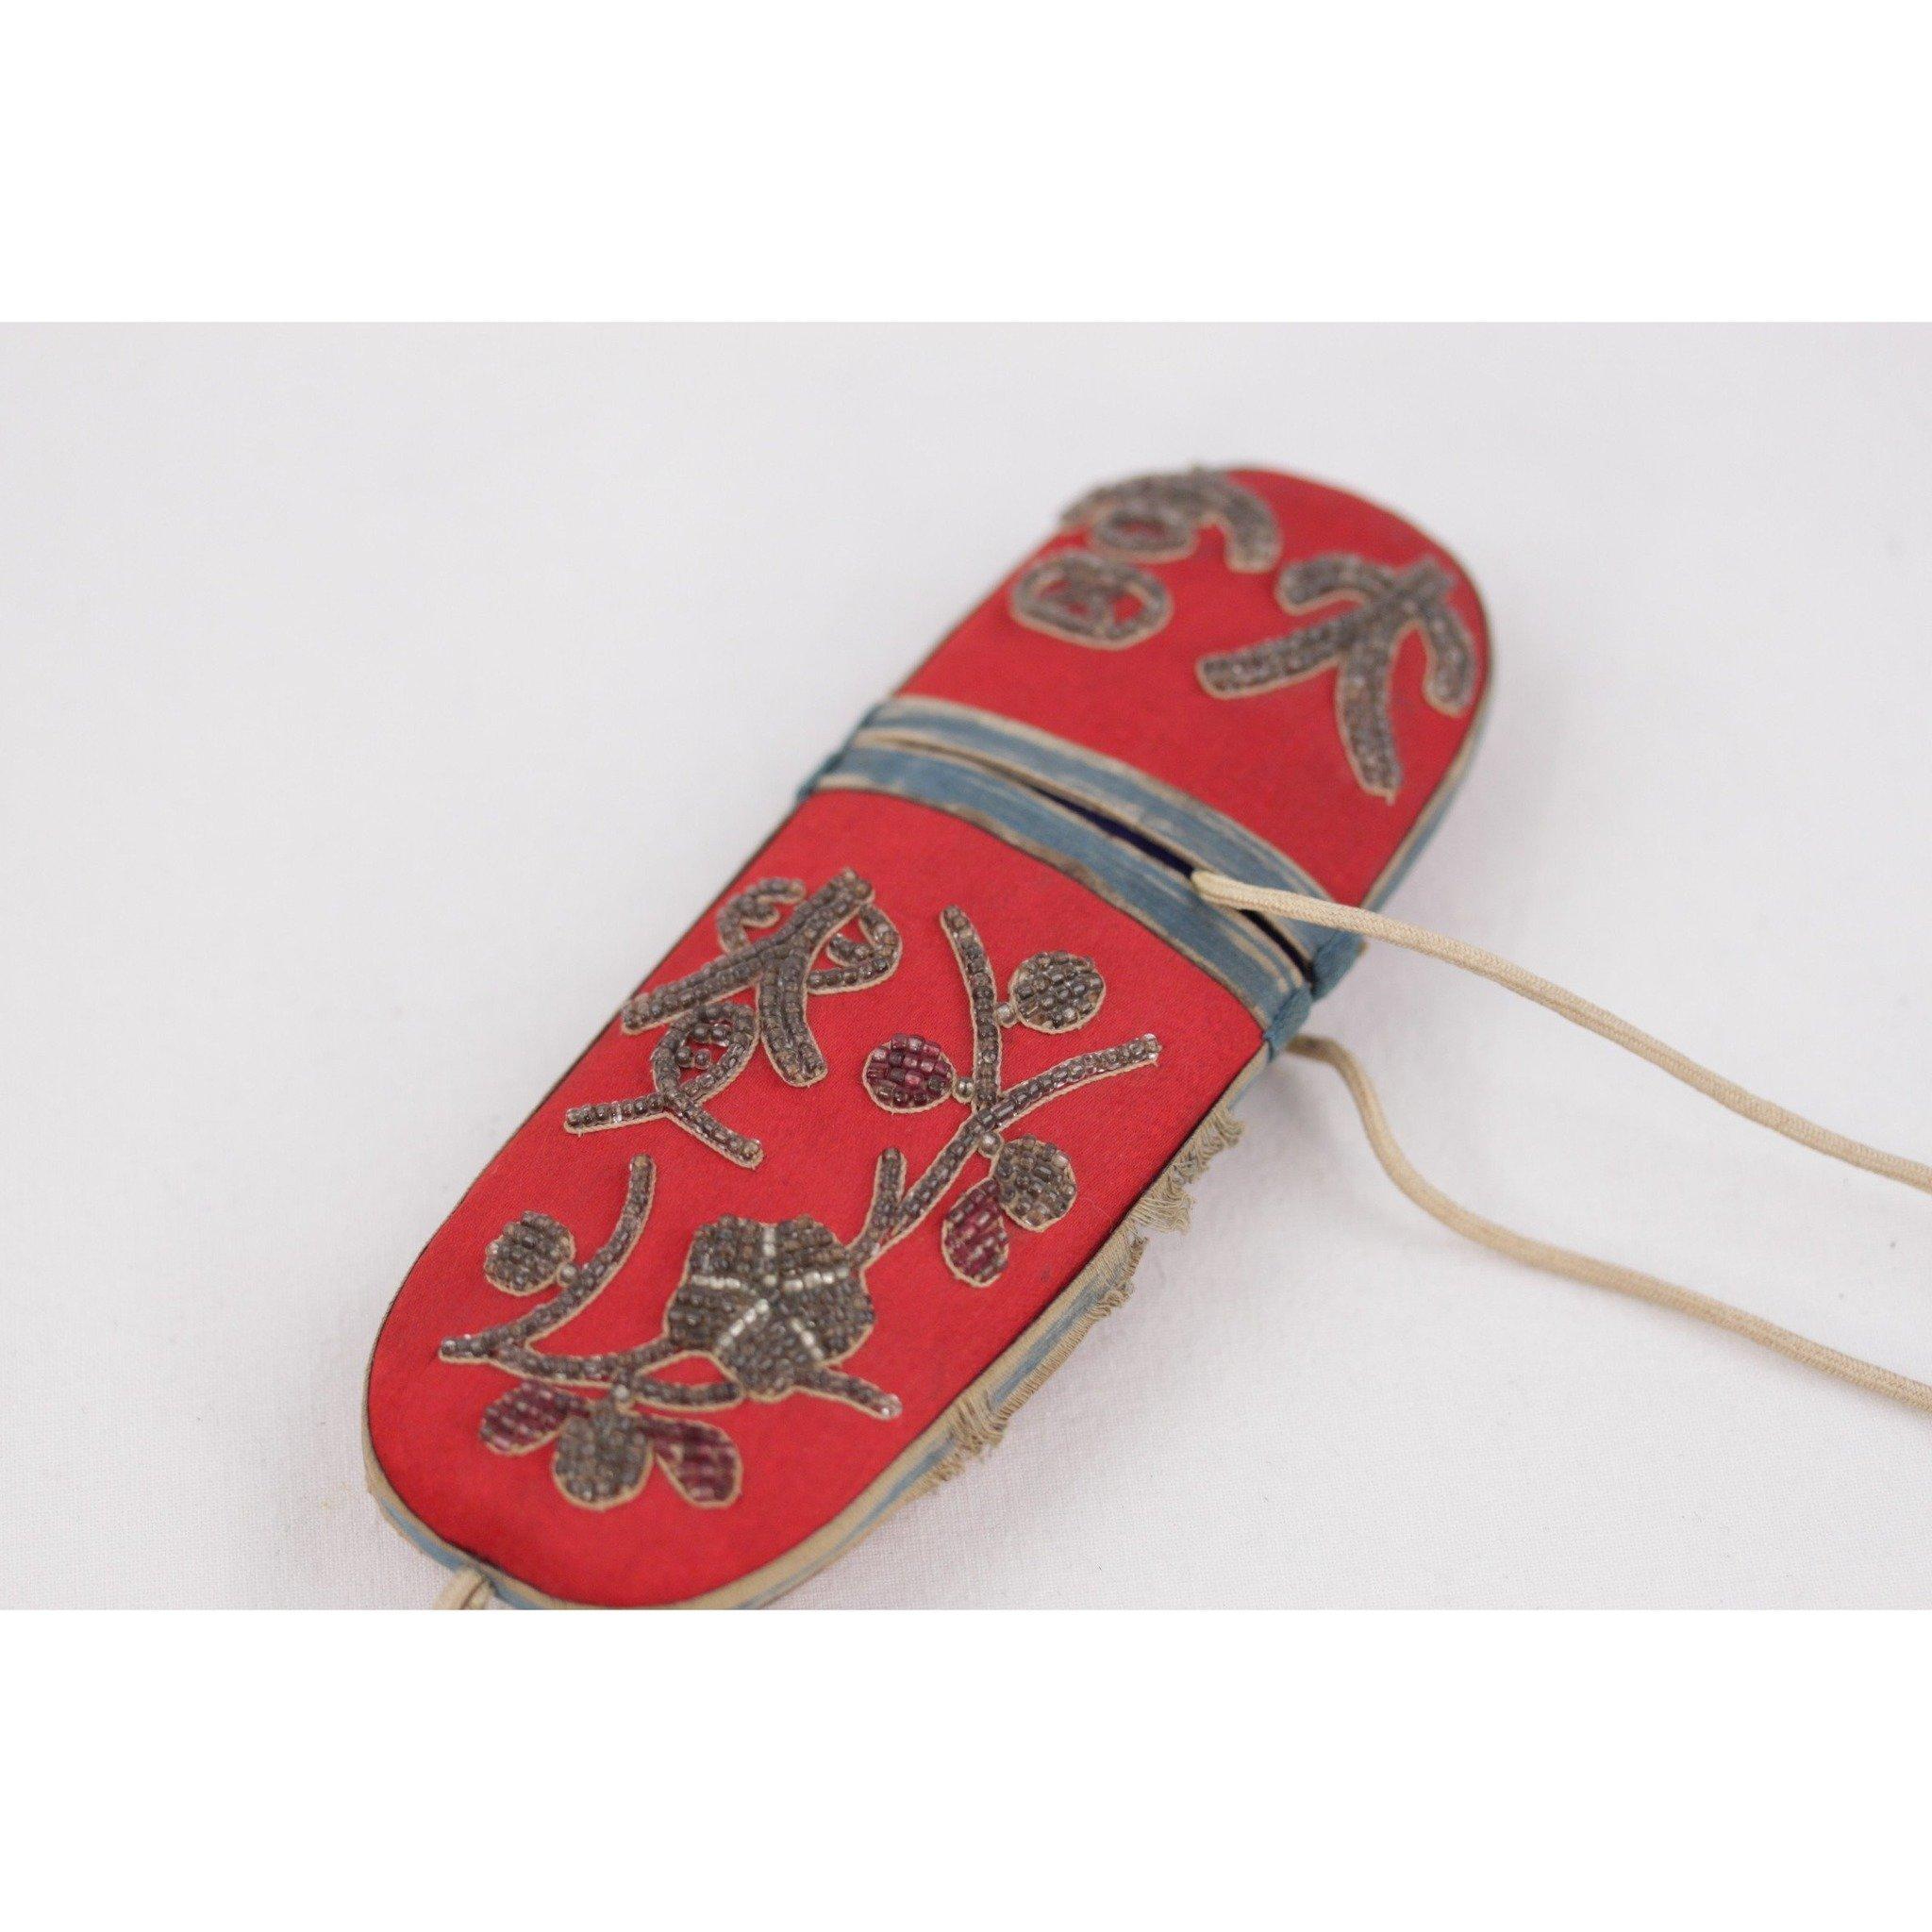 - Beautiful embroidered Chinese Eyeglasses case. - From the late 19th century (Qing/Ch'ing Dinasty) - Red Hand-dieyd Silk with lovely beaded embroidery on both sides - These charming decorative pouches were used as a sachet pouch and are also